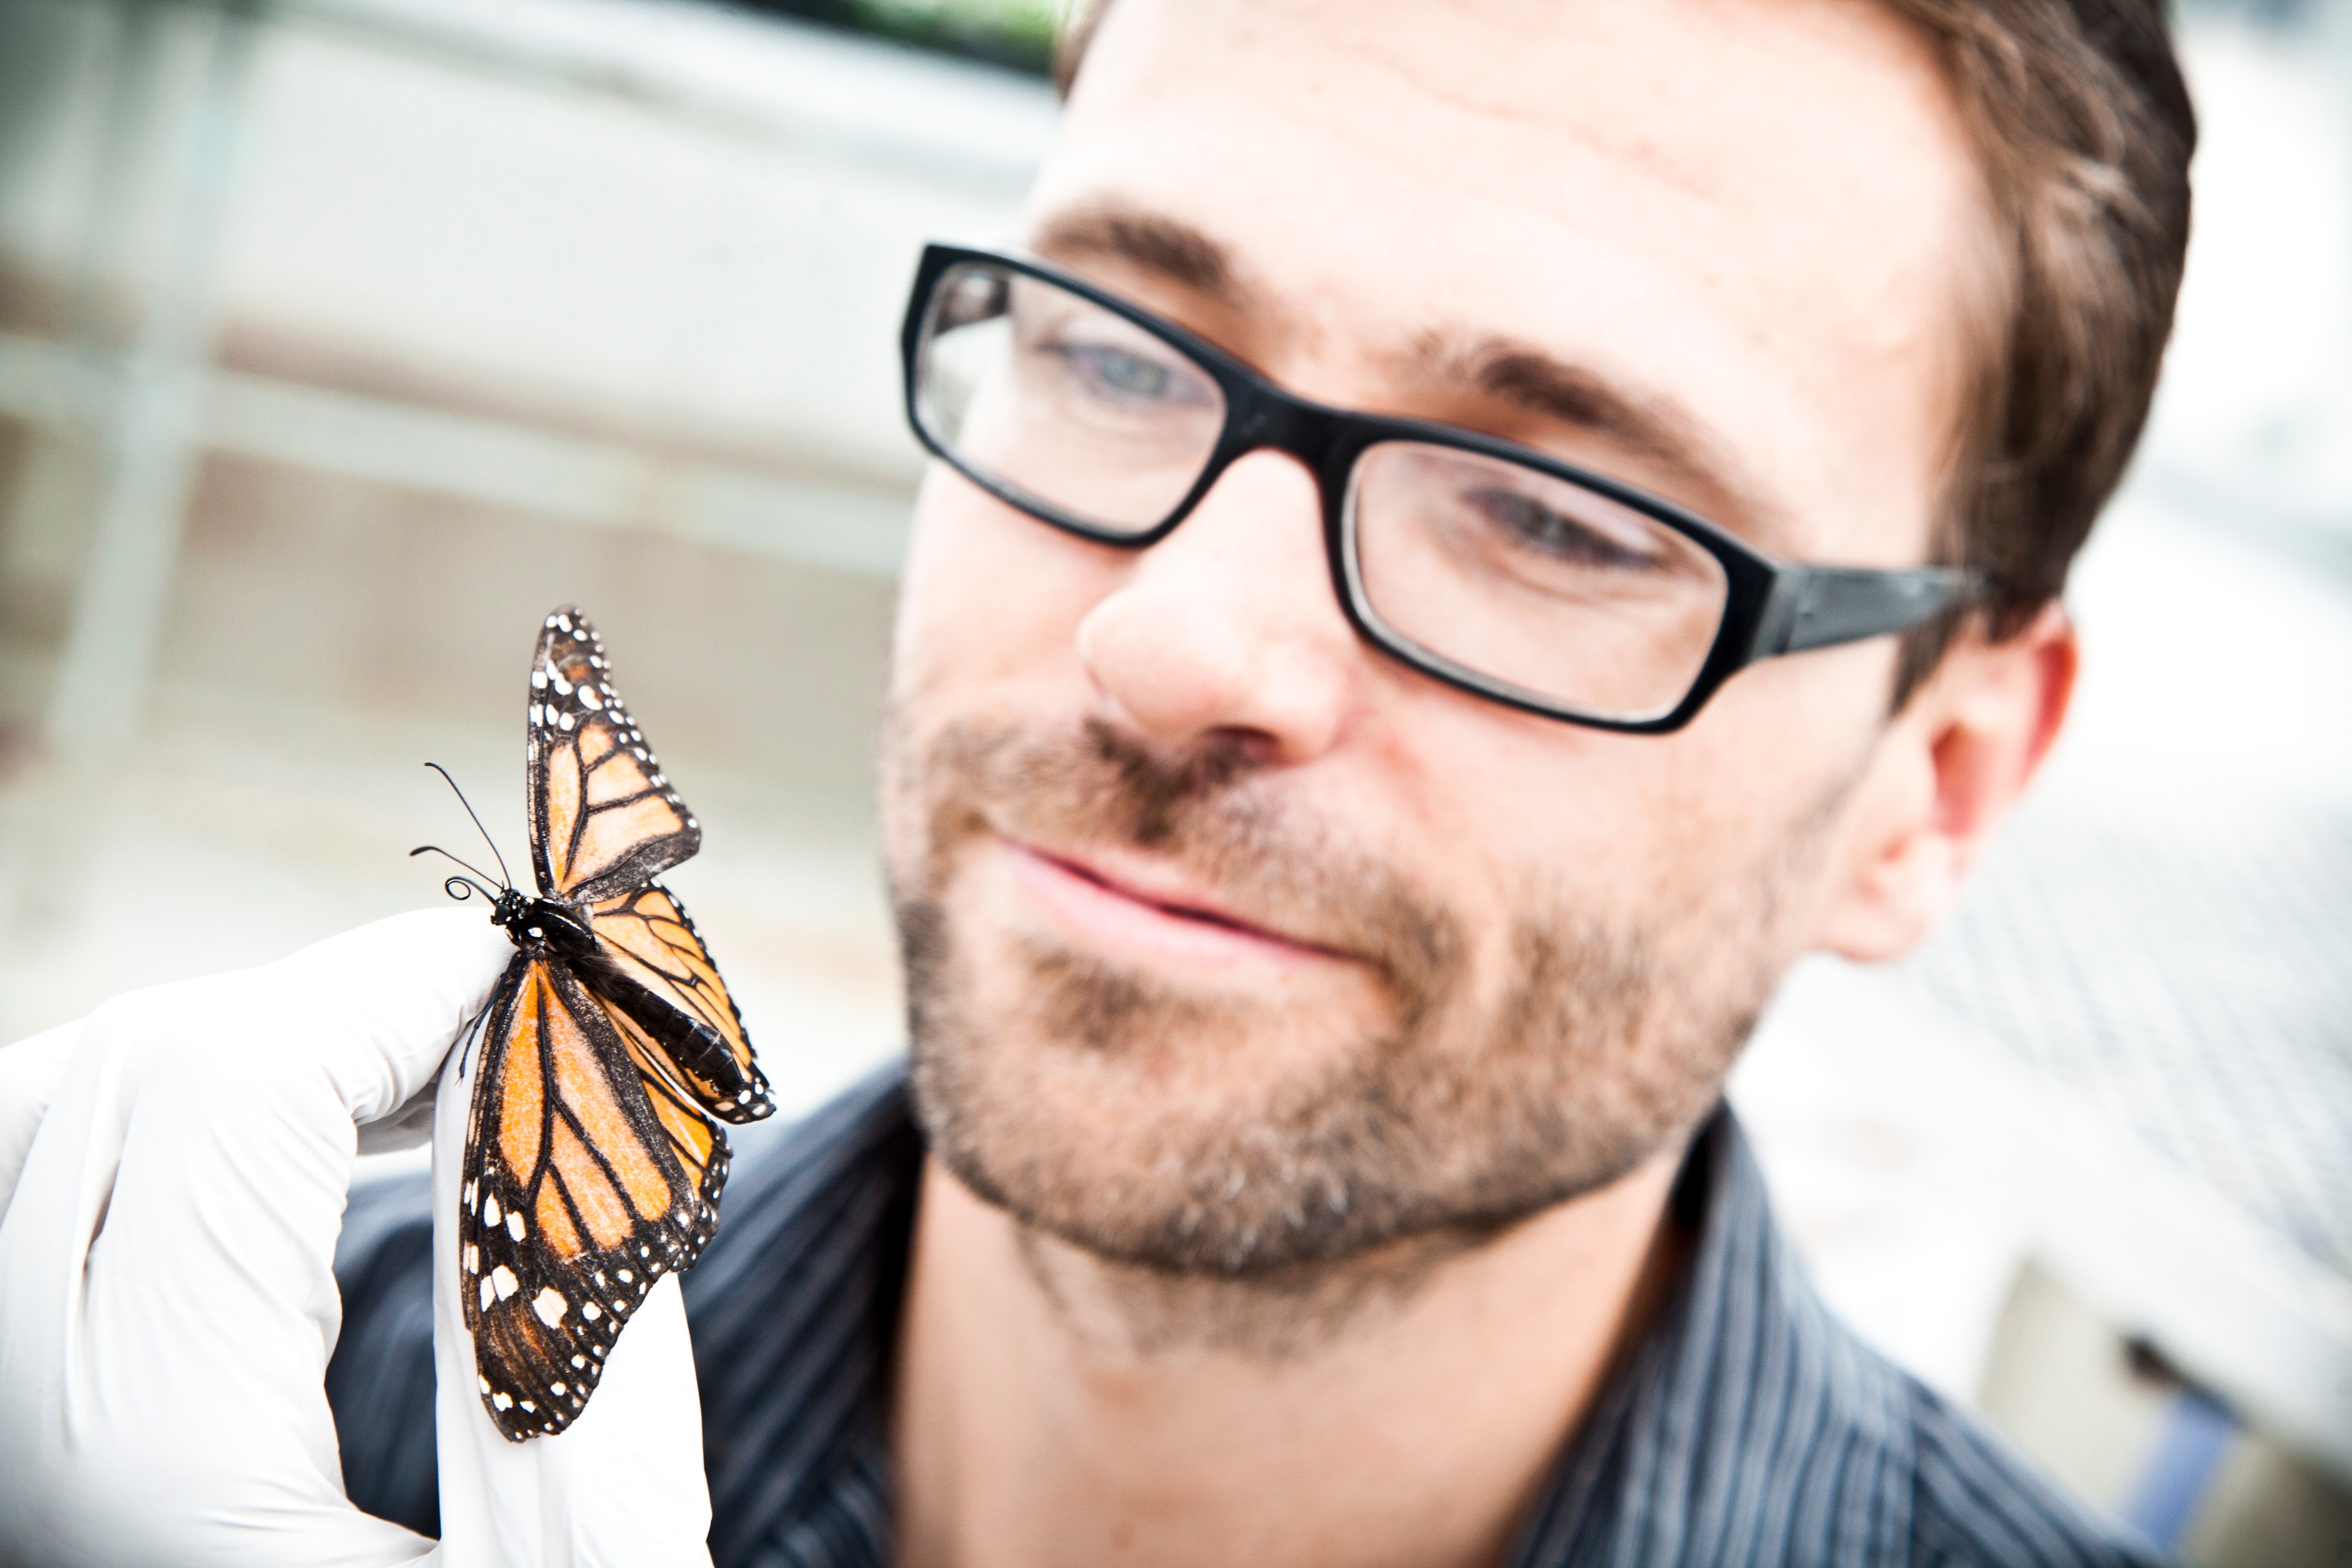 The other butterfly effect: A youth reporter finds out how monarchs
fight their own parasites